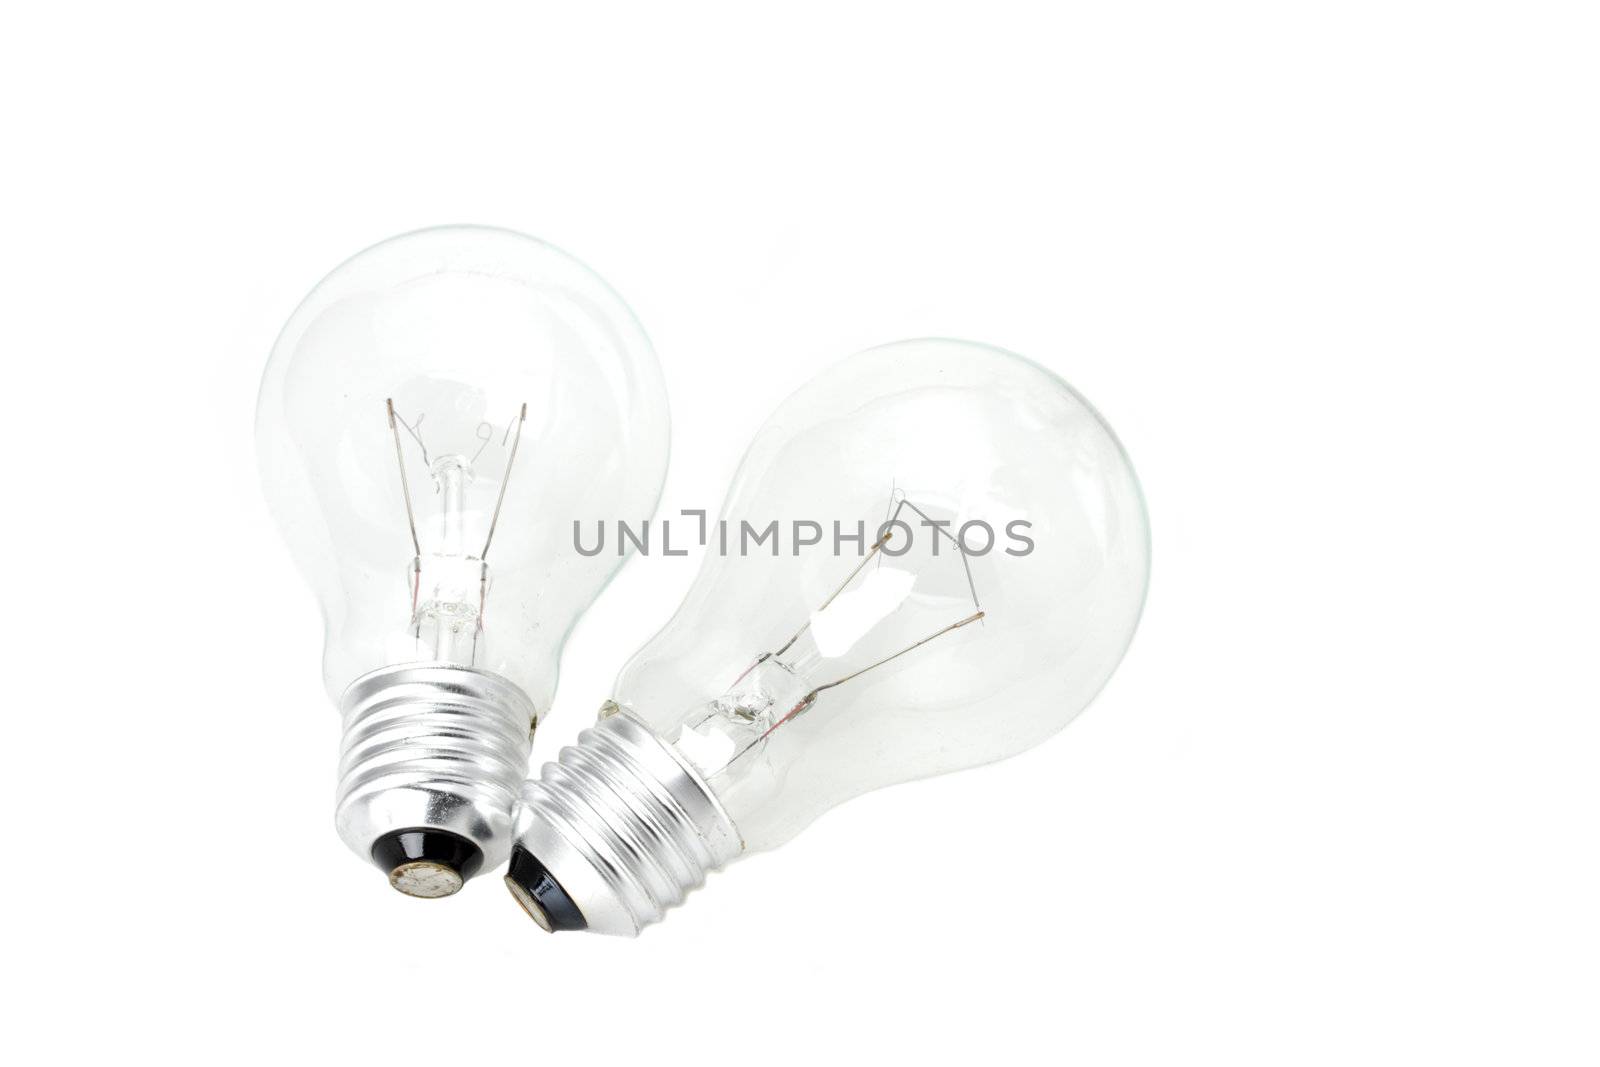 two conventional light bulbs on white background by bernjuer